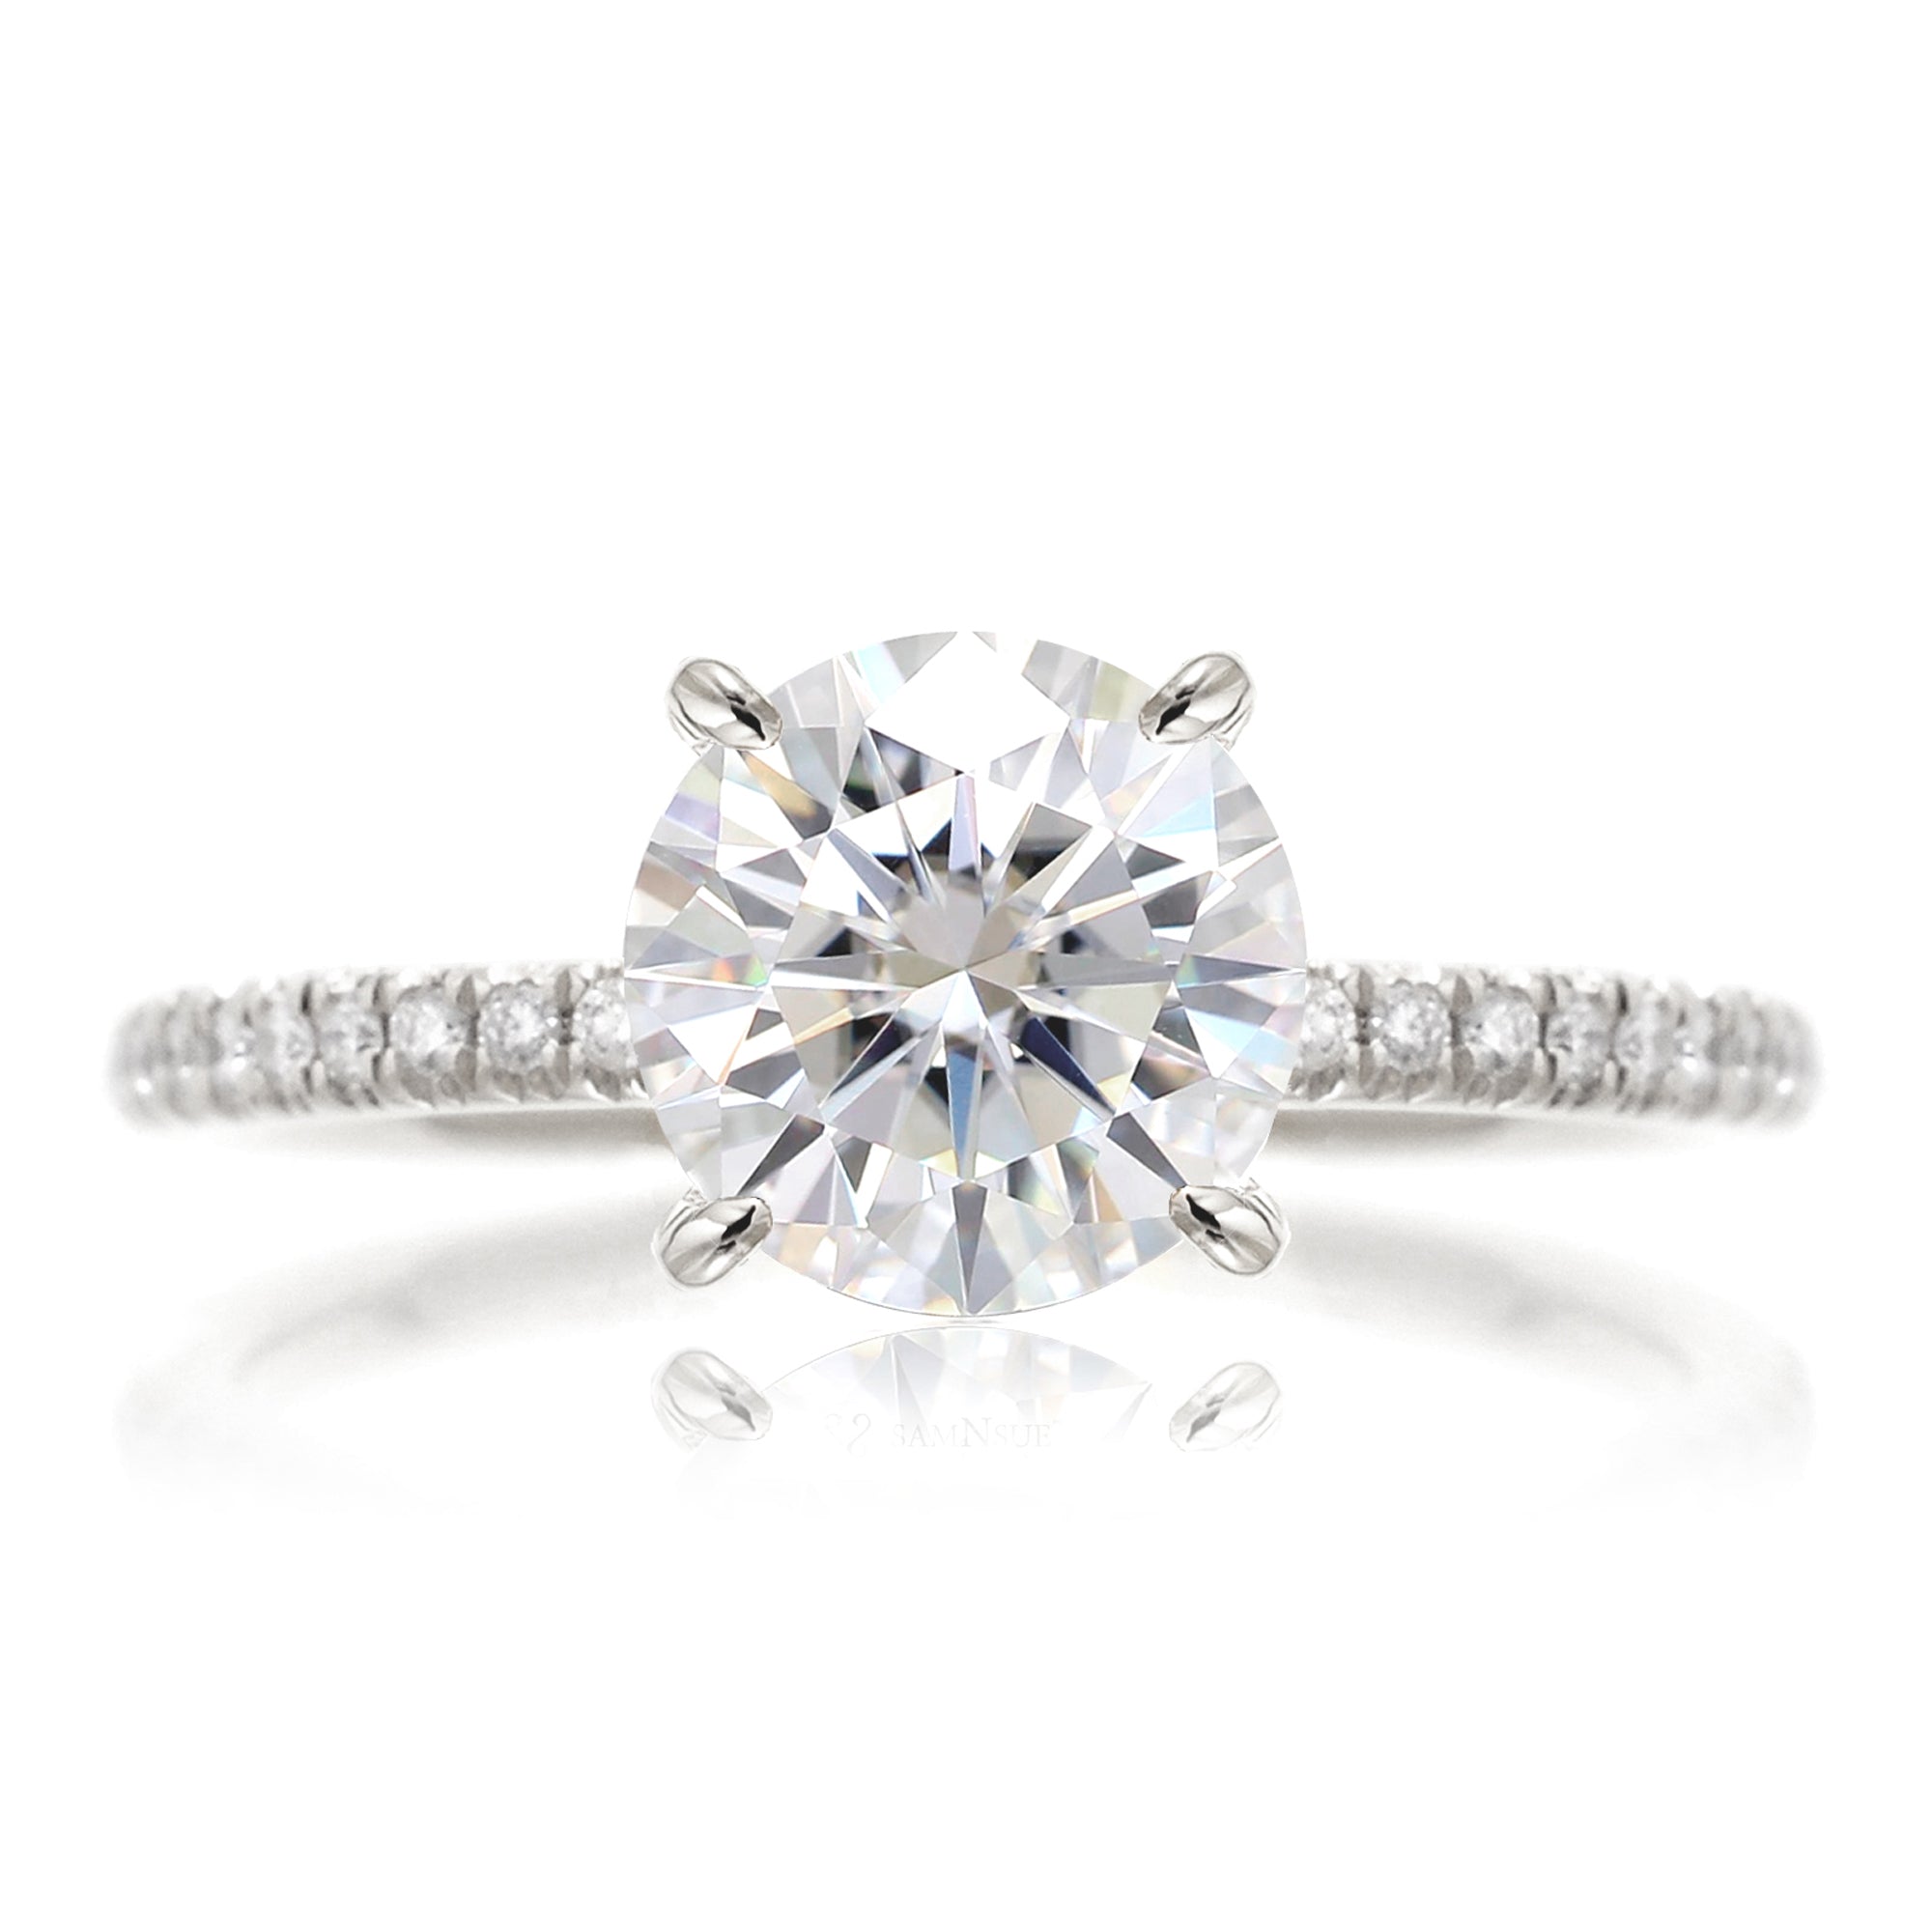 Round cut lab-grown diamond engagement ring white gold - The Ava